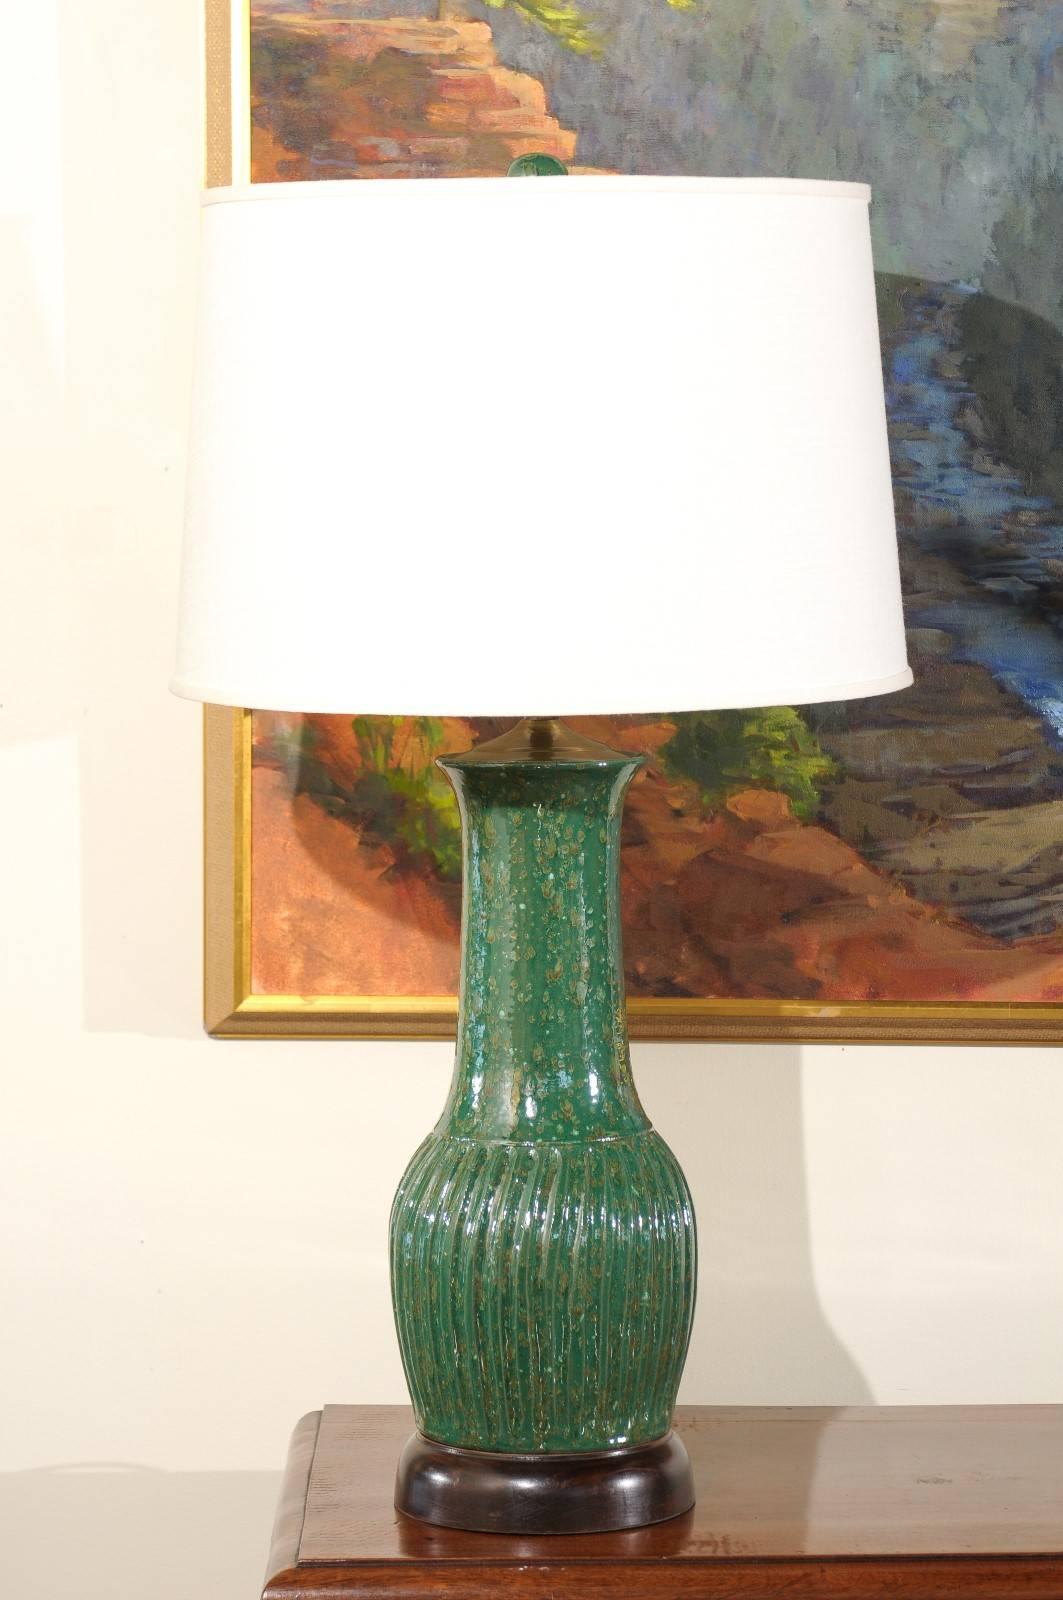 This unique hand-turned lamp is created by Charlie West, a noted North Georgia potter since 1986. It is mounted on a wooden base which is hand-turned on a wood lathe. Each of his lamps is an original.